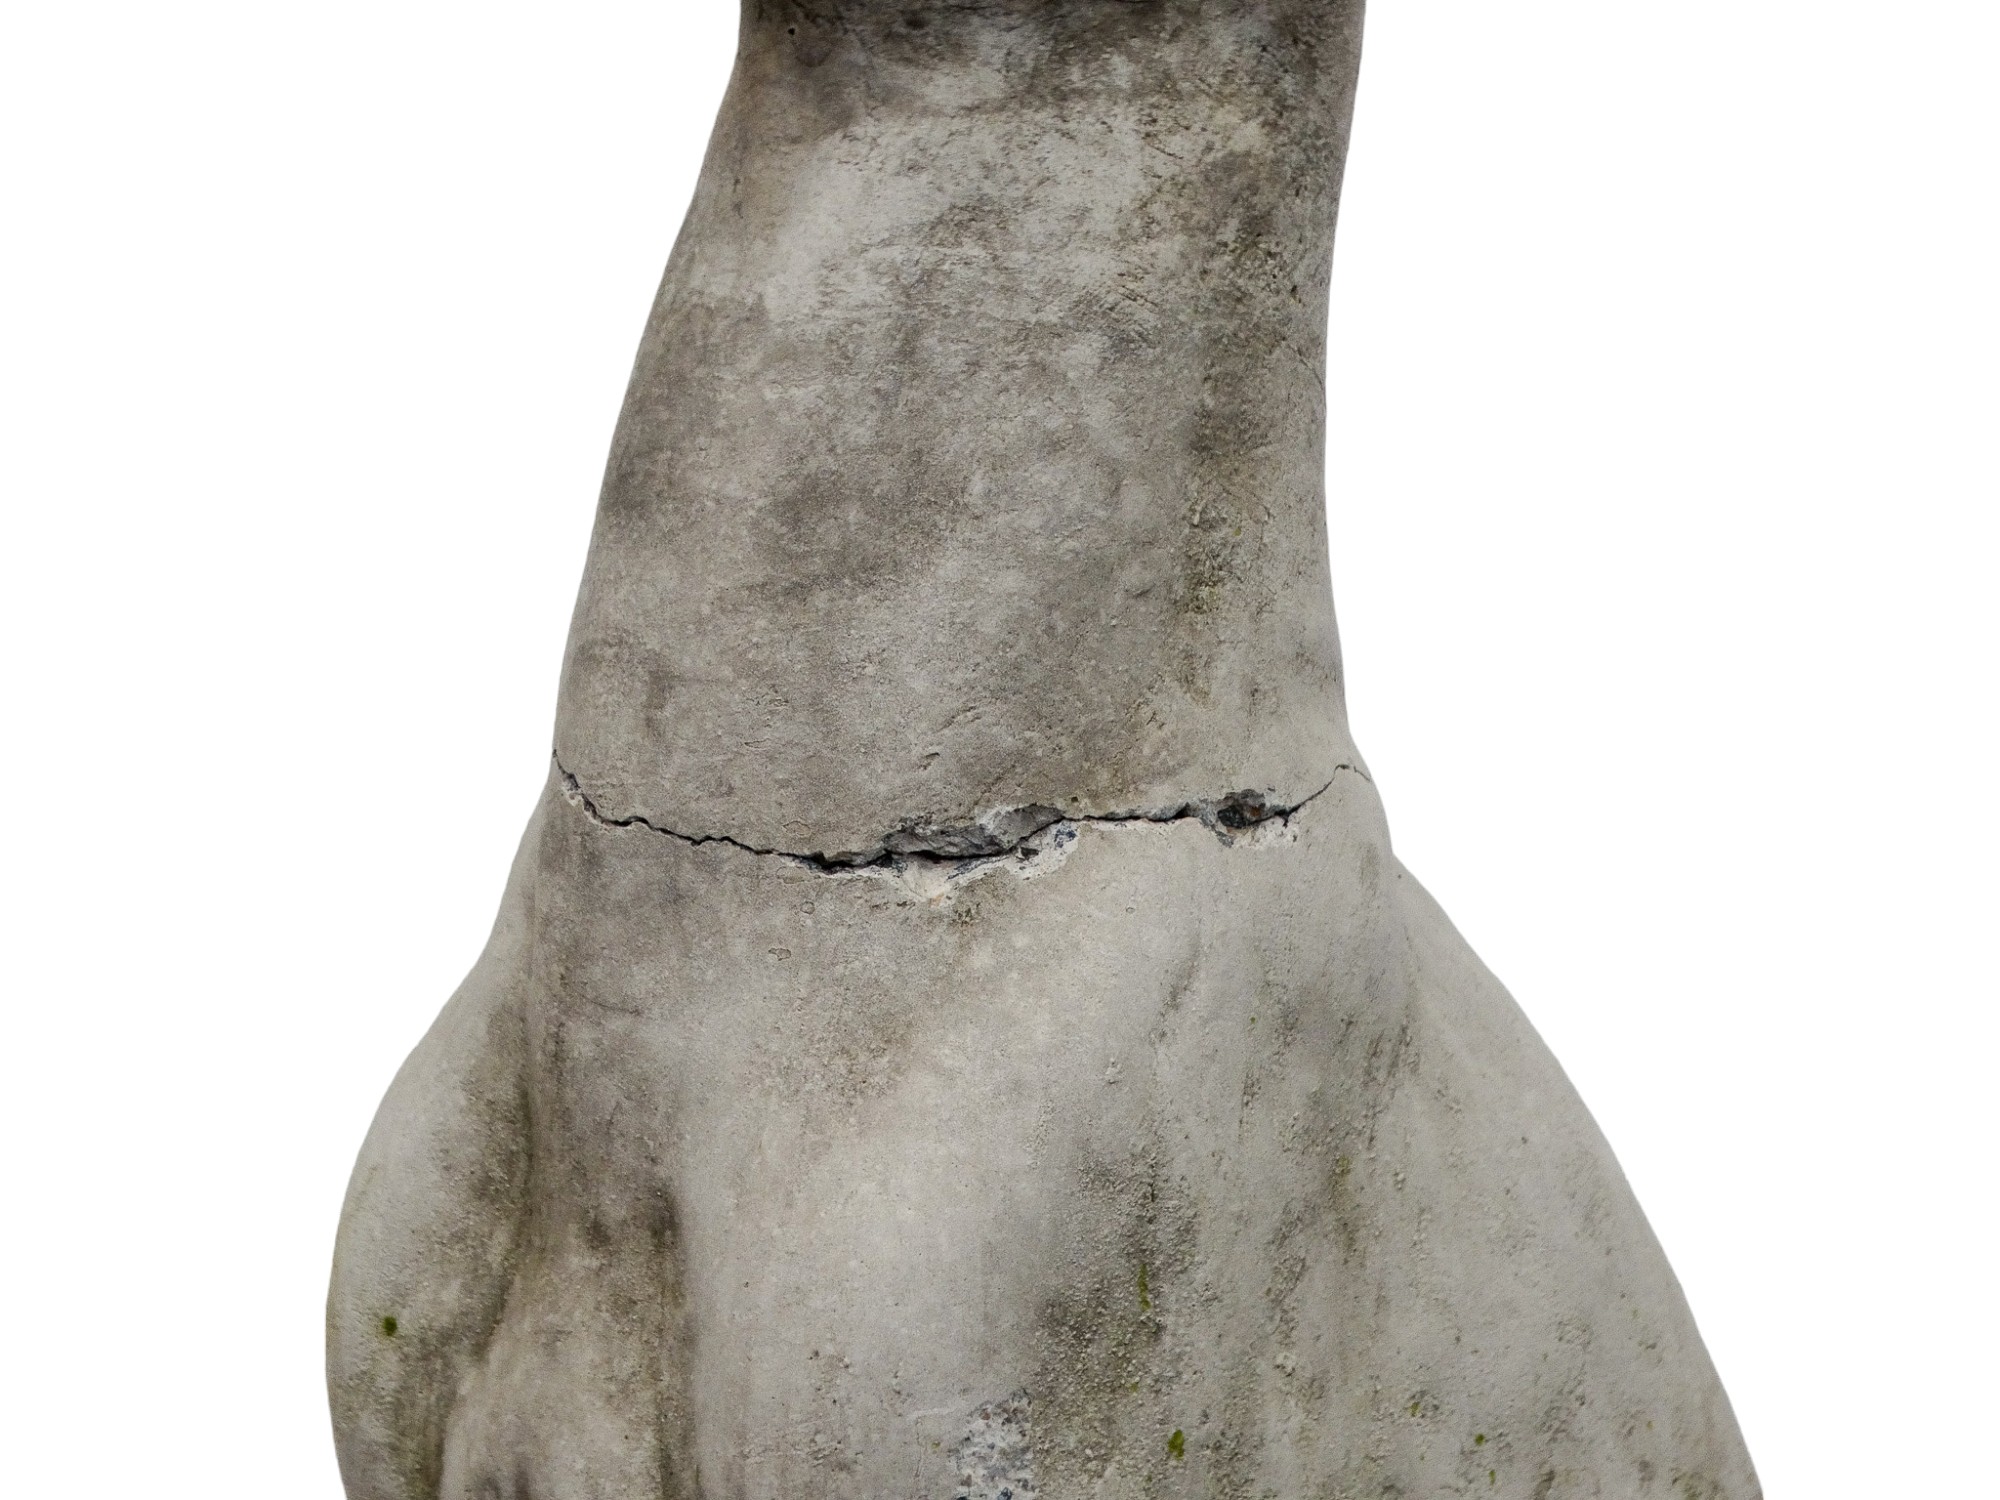 Pair of reconstituted stone dogs - seated alert pose, 55cm high - Image 10 of 10